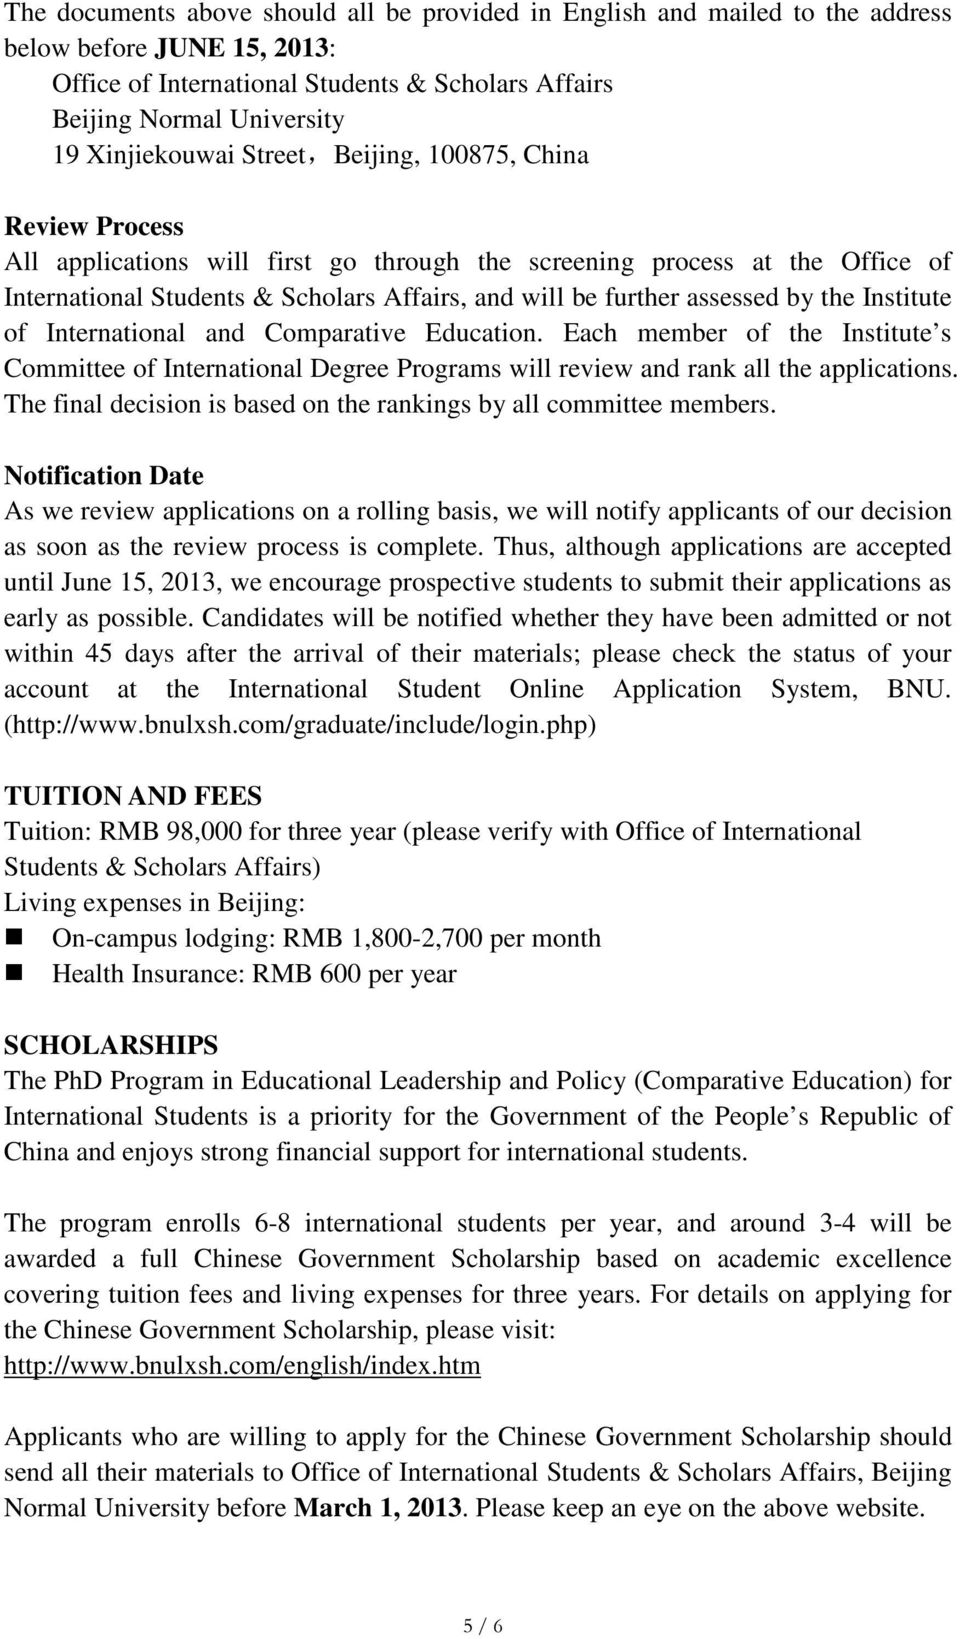 assessed by the Institute of International and Comparative Education. Each member of the Institute s Committee of International Degree Programs will review and rank all the applications.